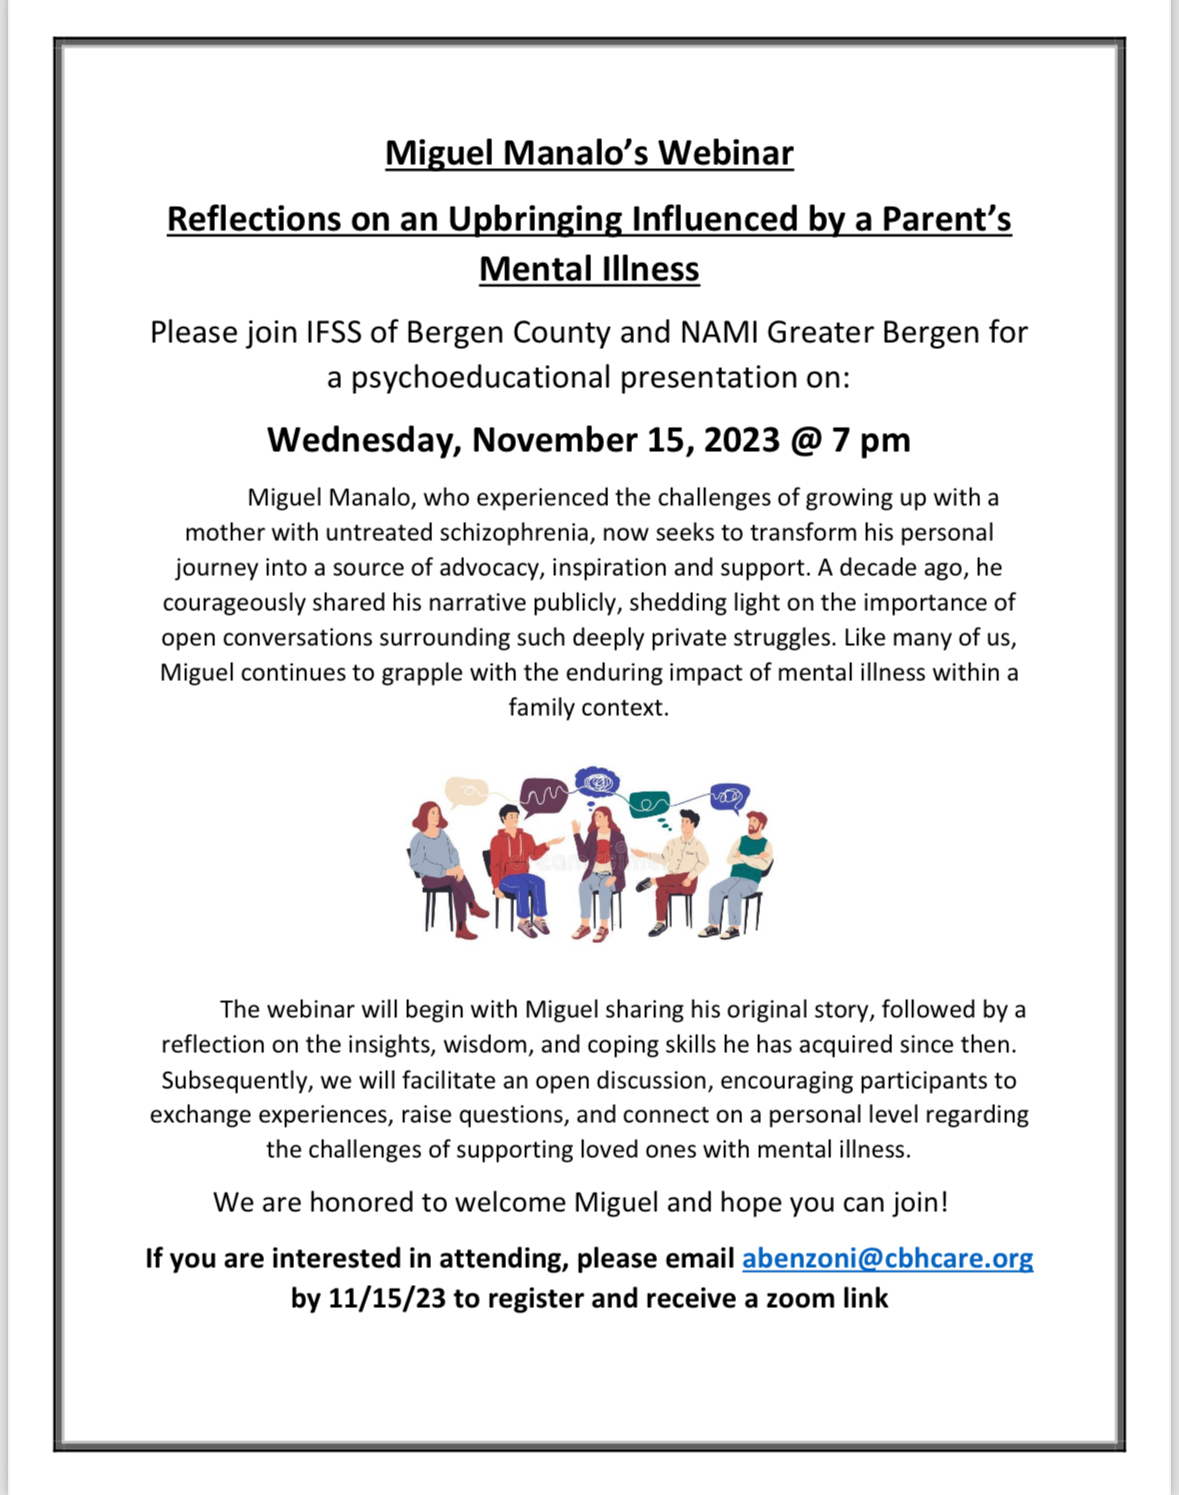 Miguel Manalo's Webinar
&10;Reflections on an Upbringing Influenced by a Parent's
&10;Mental Illness
&10;Please join IFSS of Bergen County and NAMI Greater Bergen for a psychoeducational presentation on:
&10;Wednesday, November 15, 2023 @ 7 pm
&10;The webinar will begin with Miguel sharing his original story, followed by a reflection on the insights, wisdom, and coping skills he has acquired since then.
&10;Subsequently, we will facilitate an open discussion, encouraging participants to exchange experiences, raise questions, and connect on a personal level regarding the challenges of supporting loved ones with mental illness.
&10;We are honored to welcome Miguel and hope you can join!
&10;If you are interested in attending, please email abenzoni@cbhcare.org
&10;by 11/15/23 to register and receive a zoom link